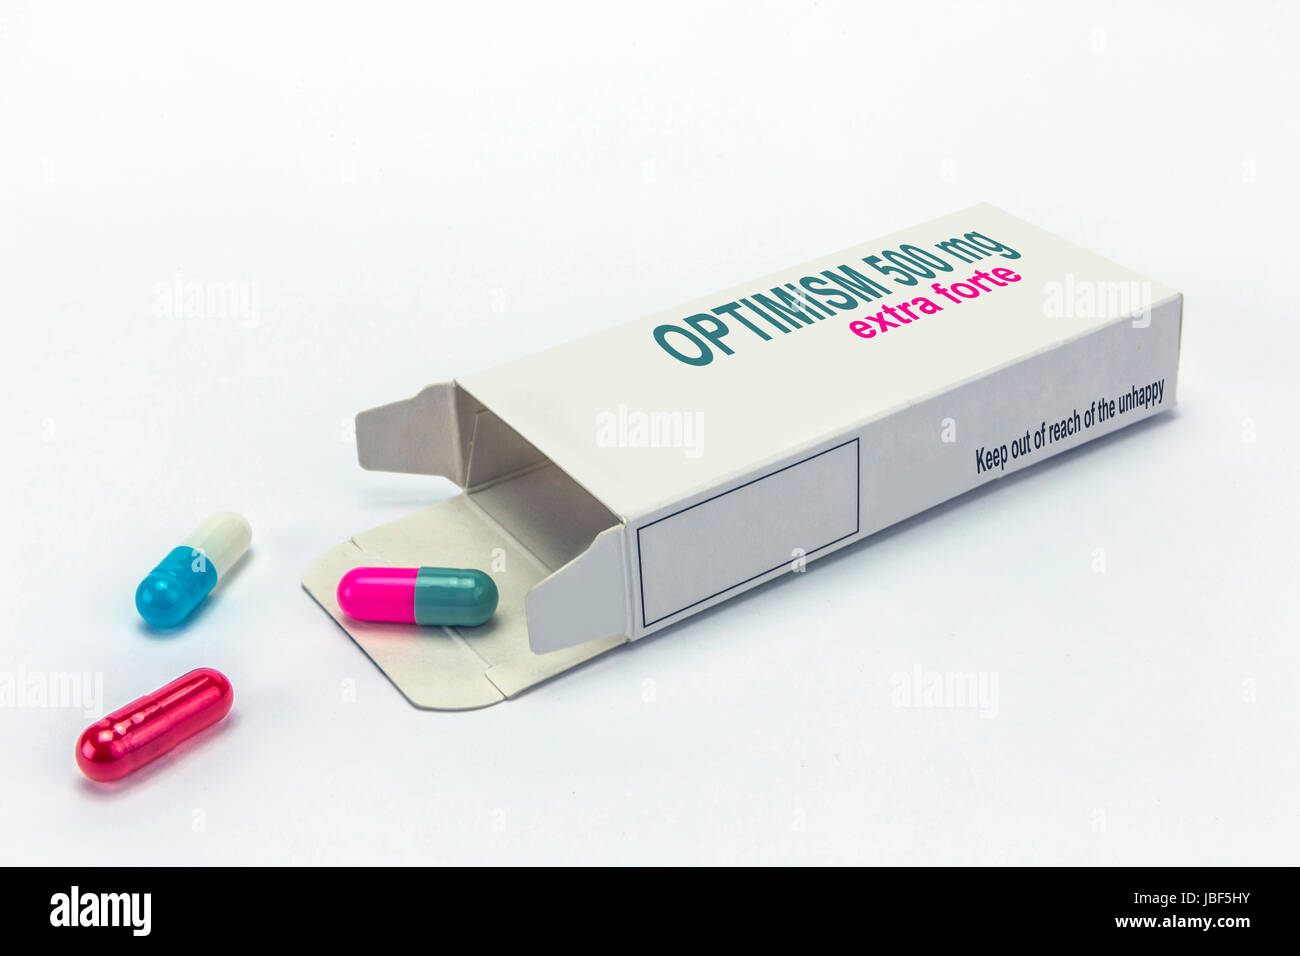 Open medicine packet labelled optimism opened at one end to display a blister pack of tablets, isolated on white Stock Photo